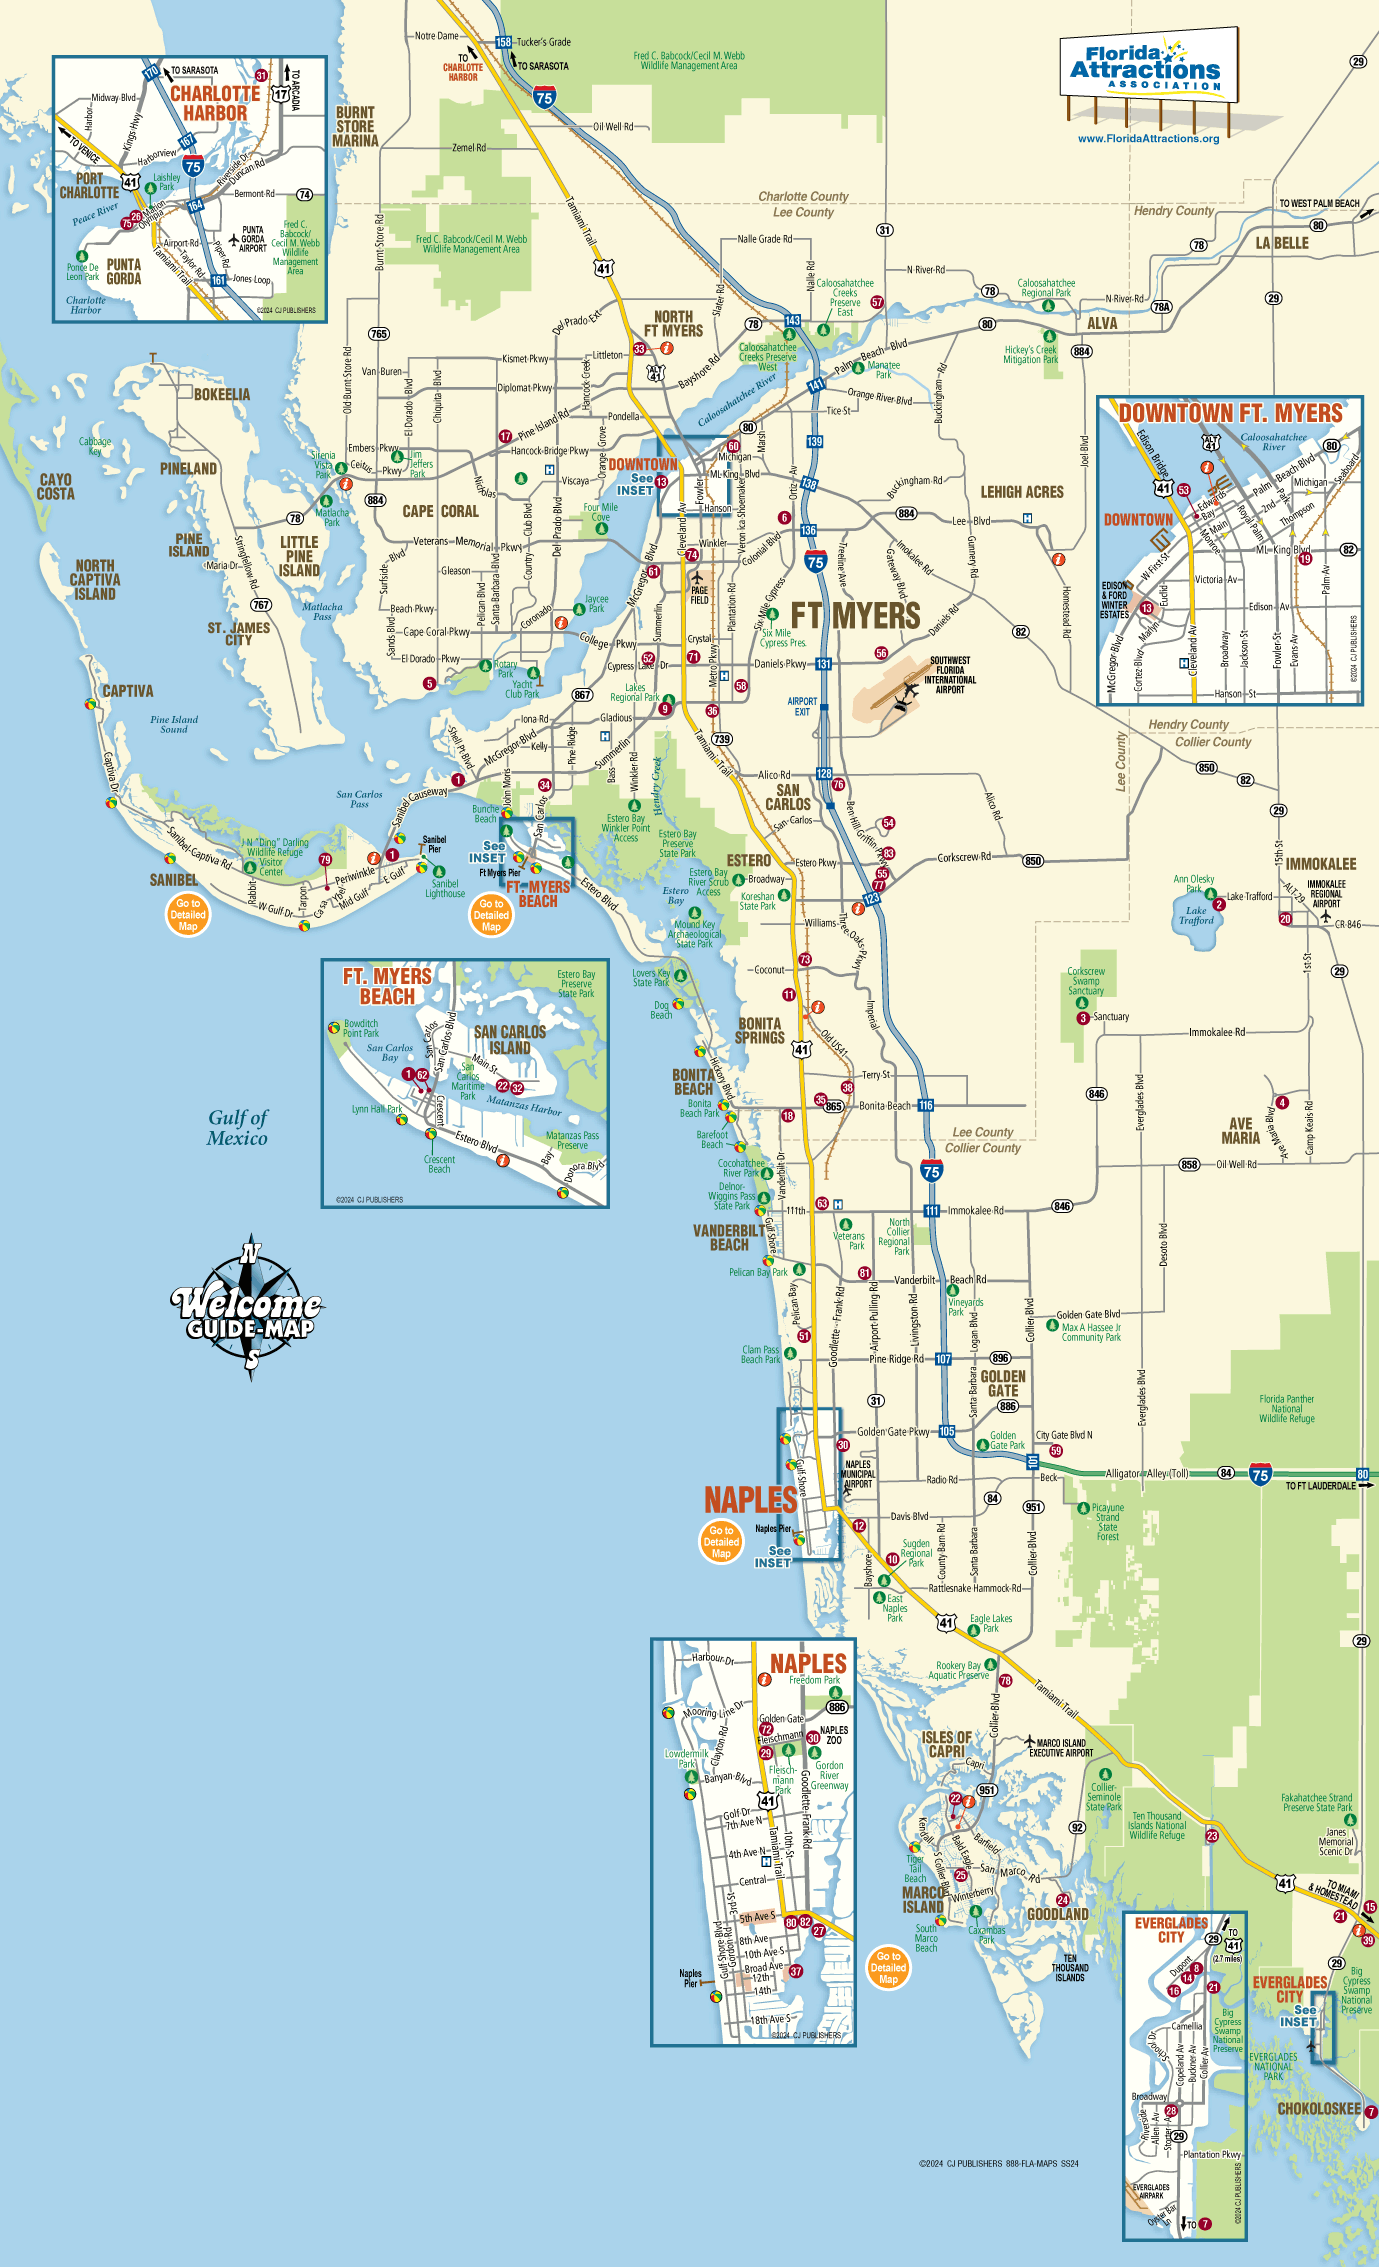 Southwest Florida Welcome Guide-Map - Fort Myers & Naples Florida Guide ...